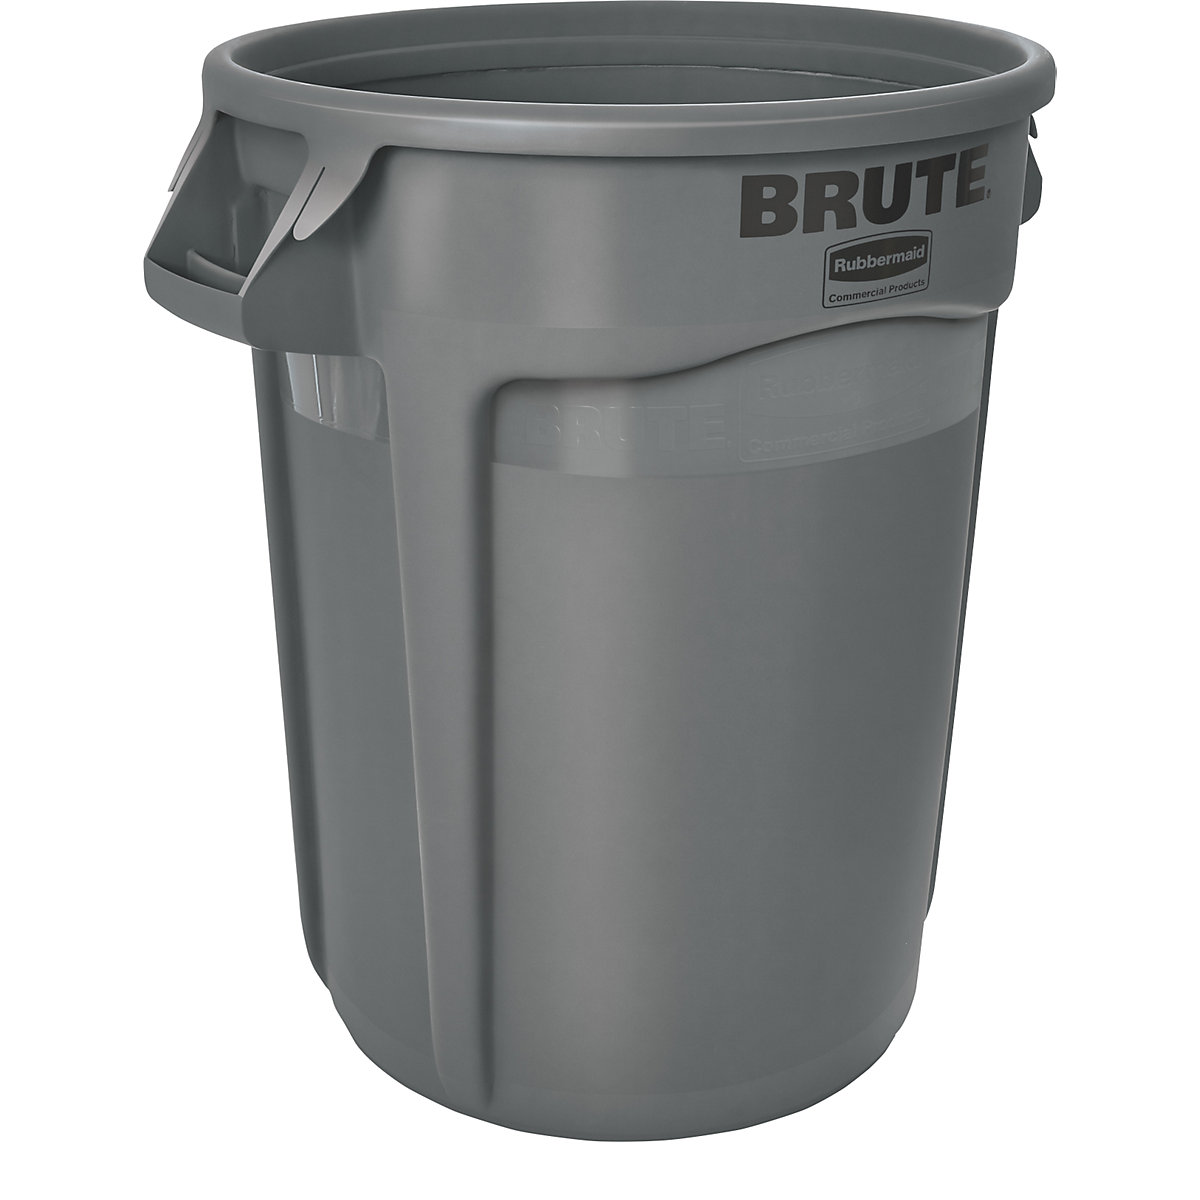 BRUTE® universal container, round – Rubbermaid, capacity 121 l, grey-9